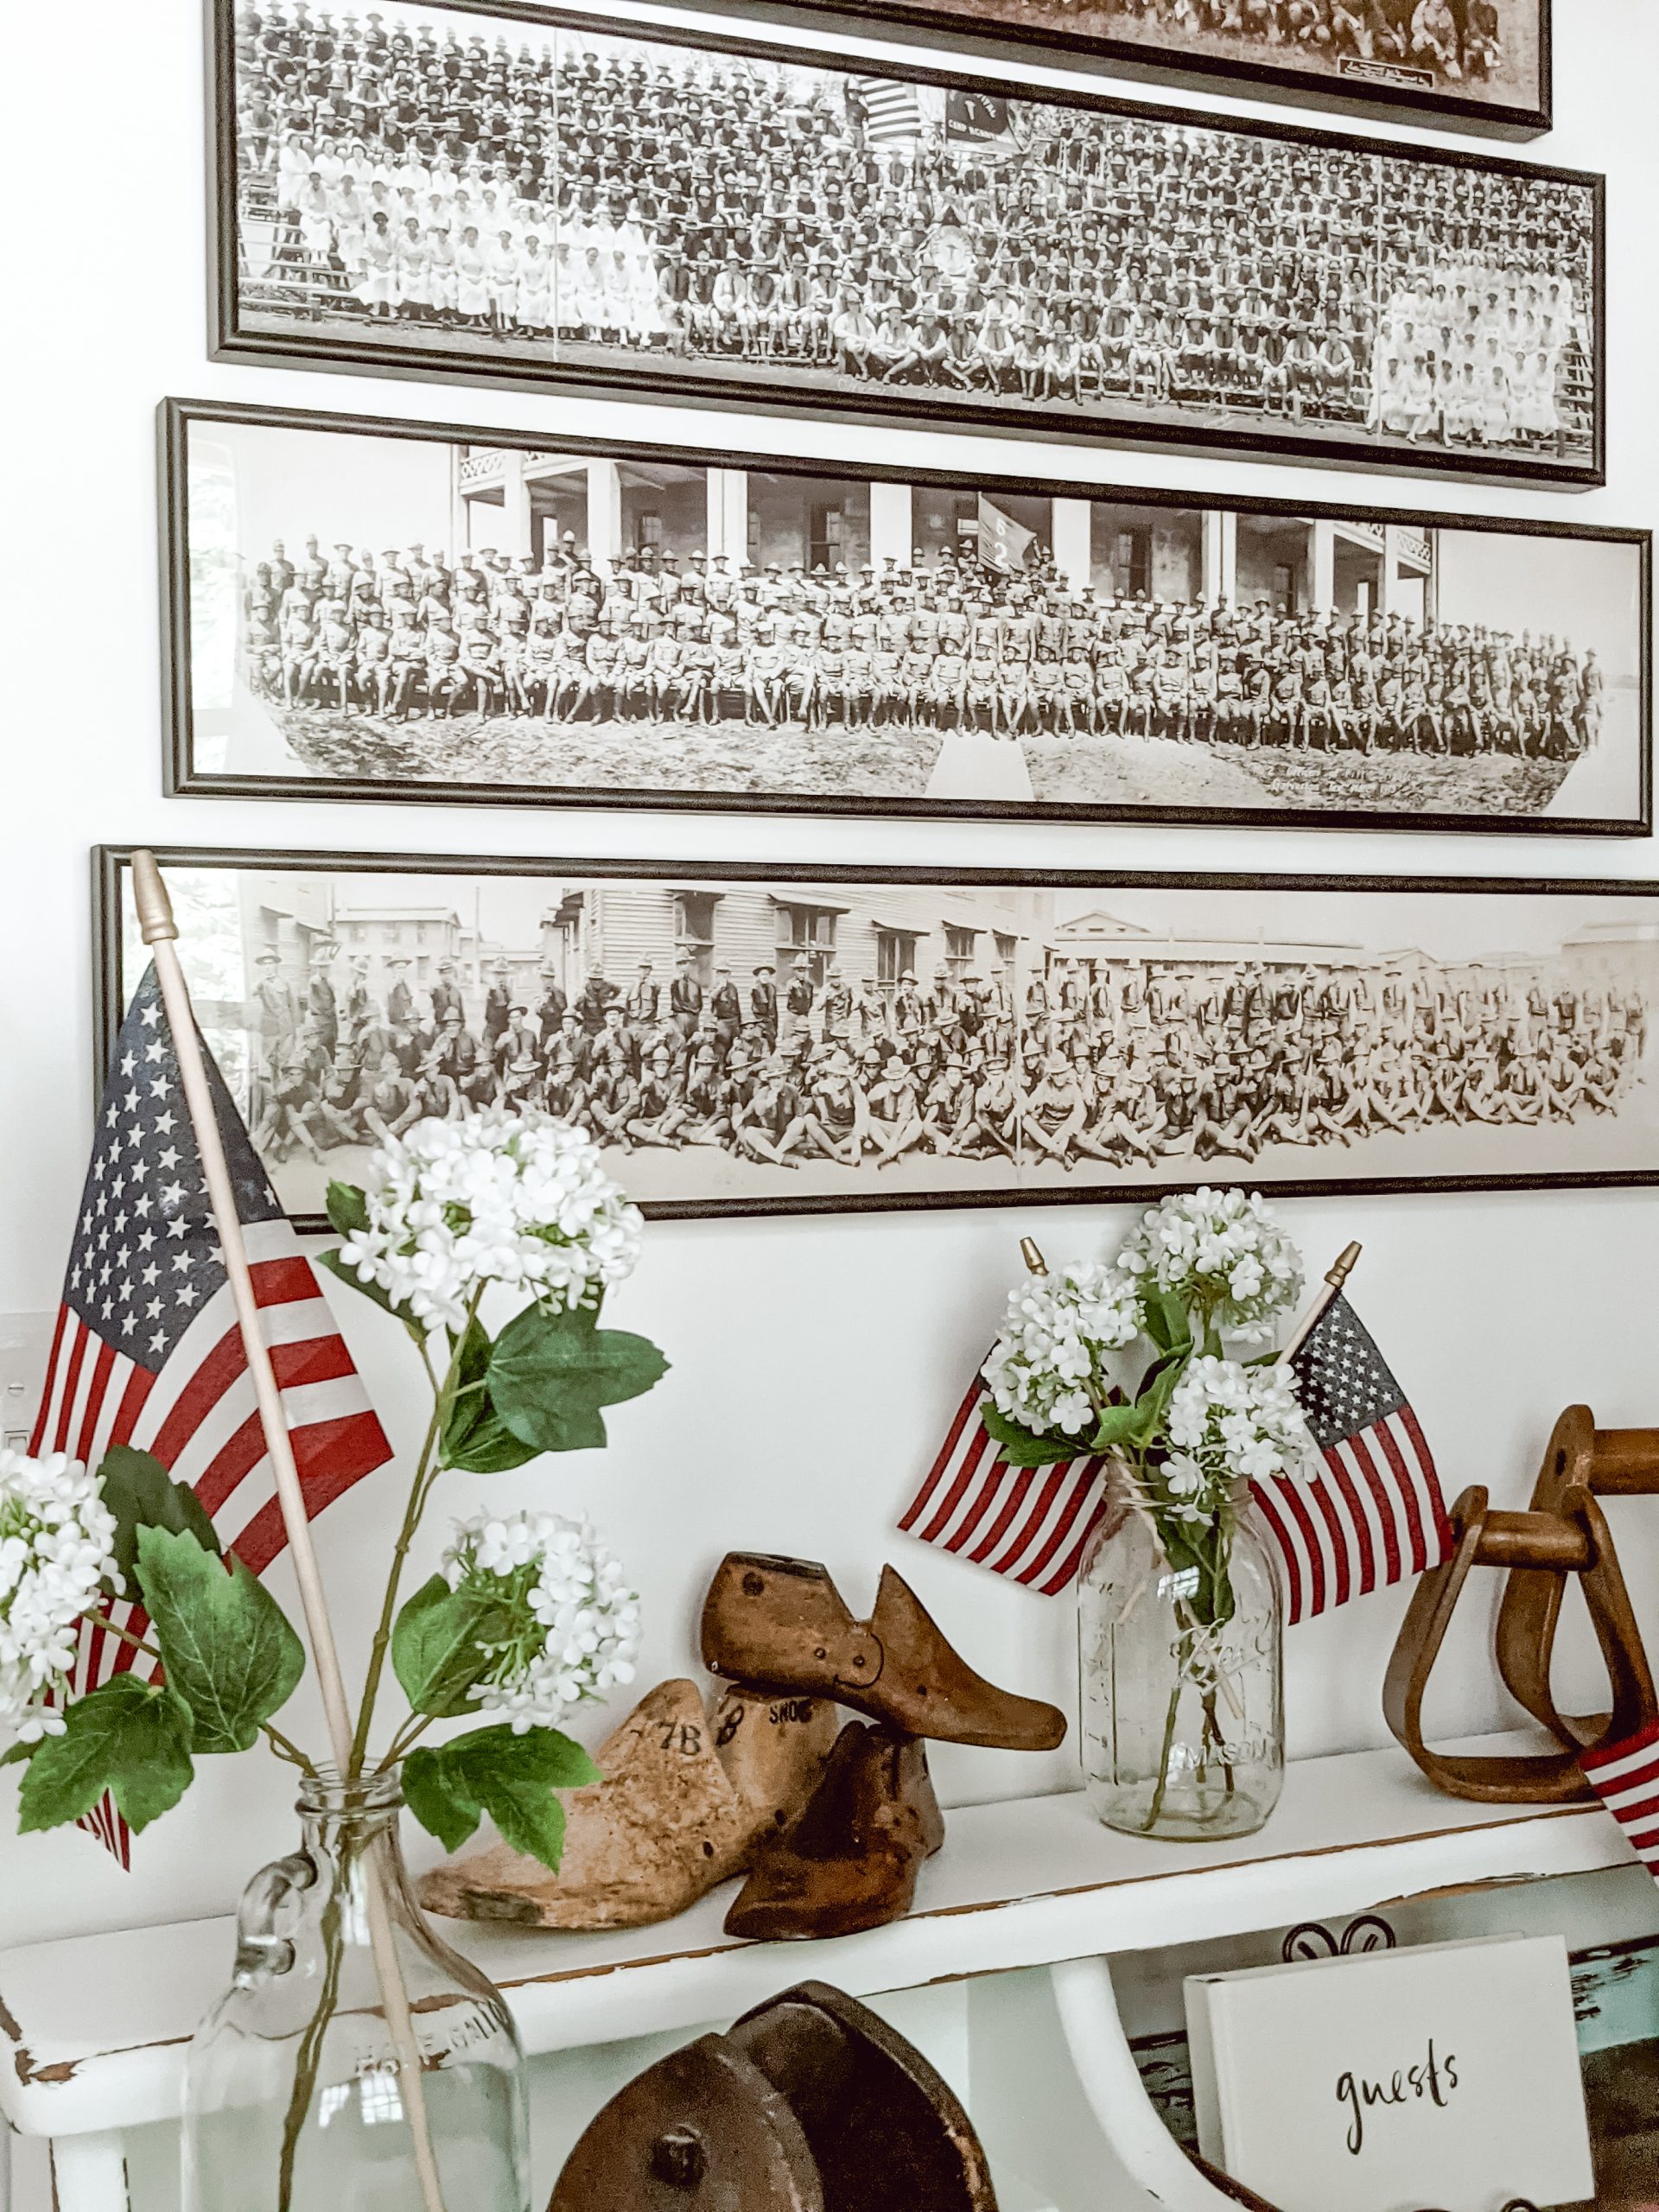 vintage military panoramic photos and memorial day decor